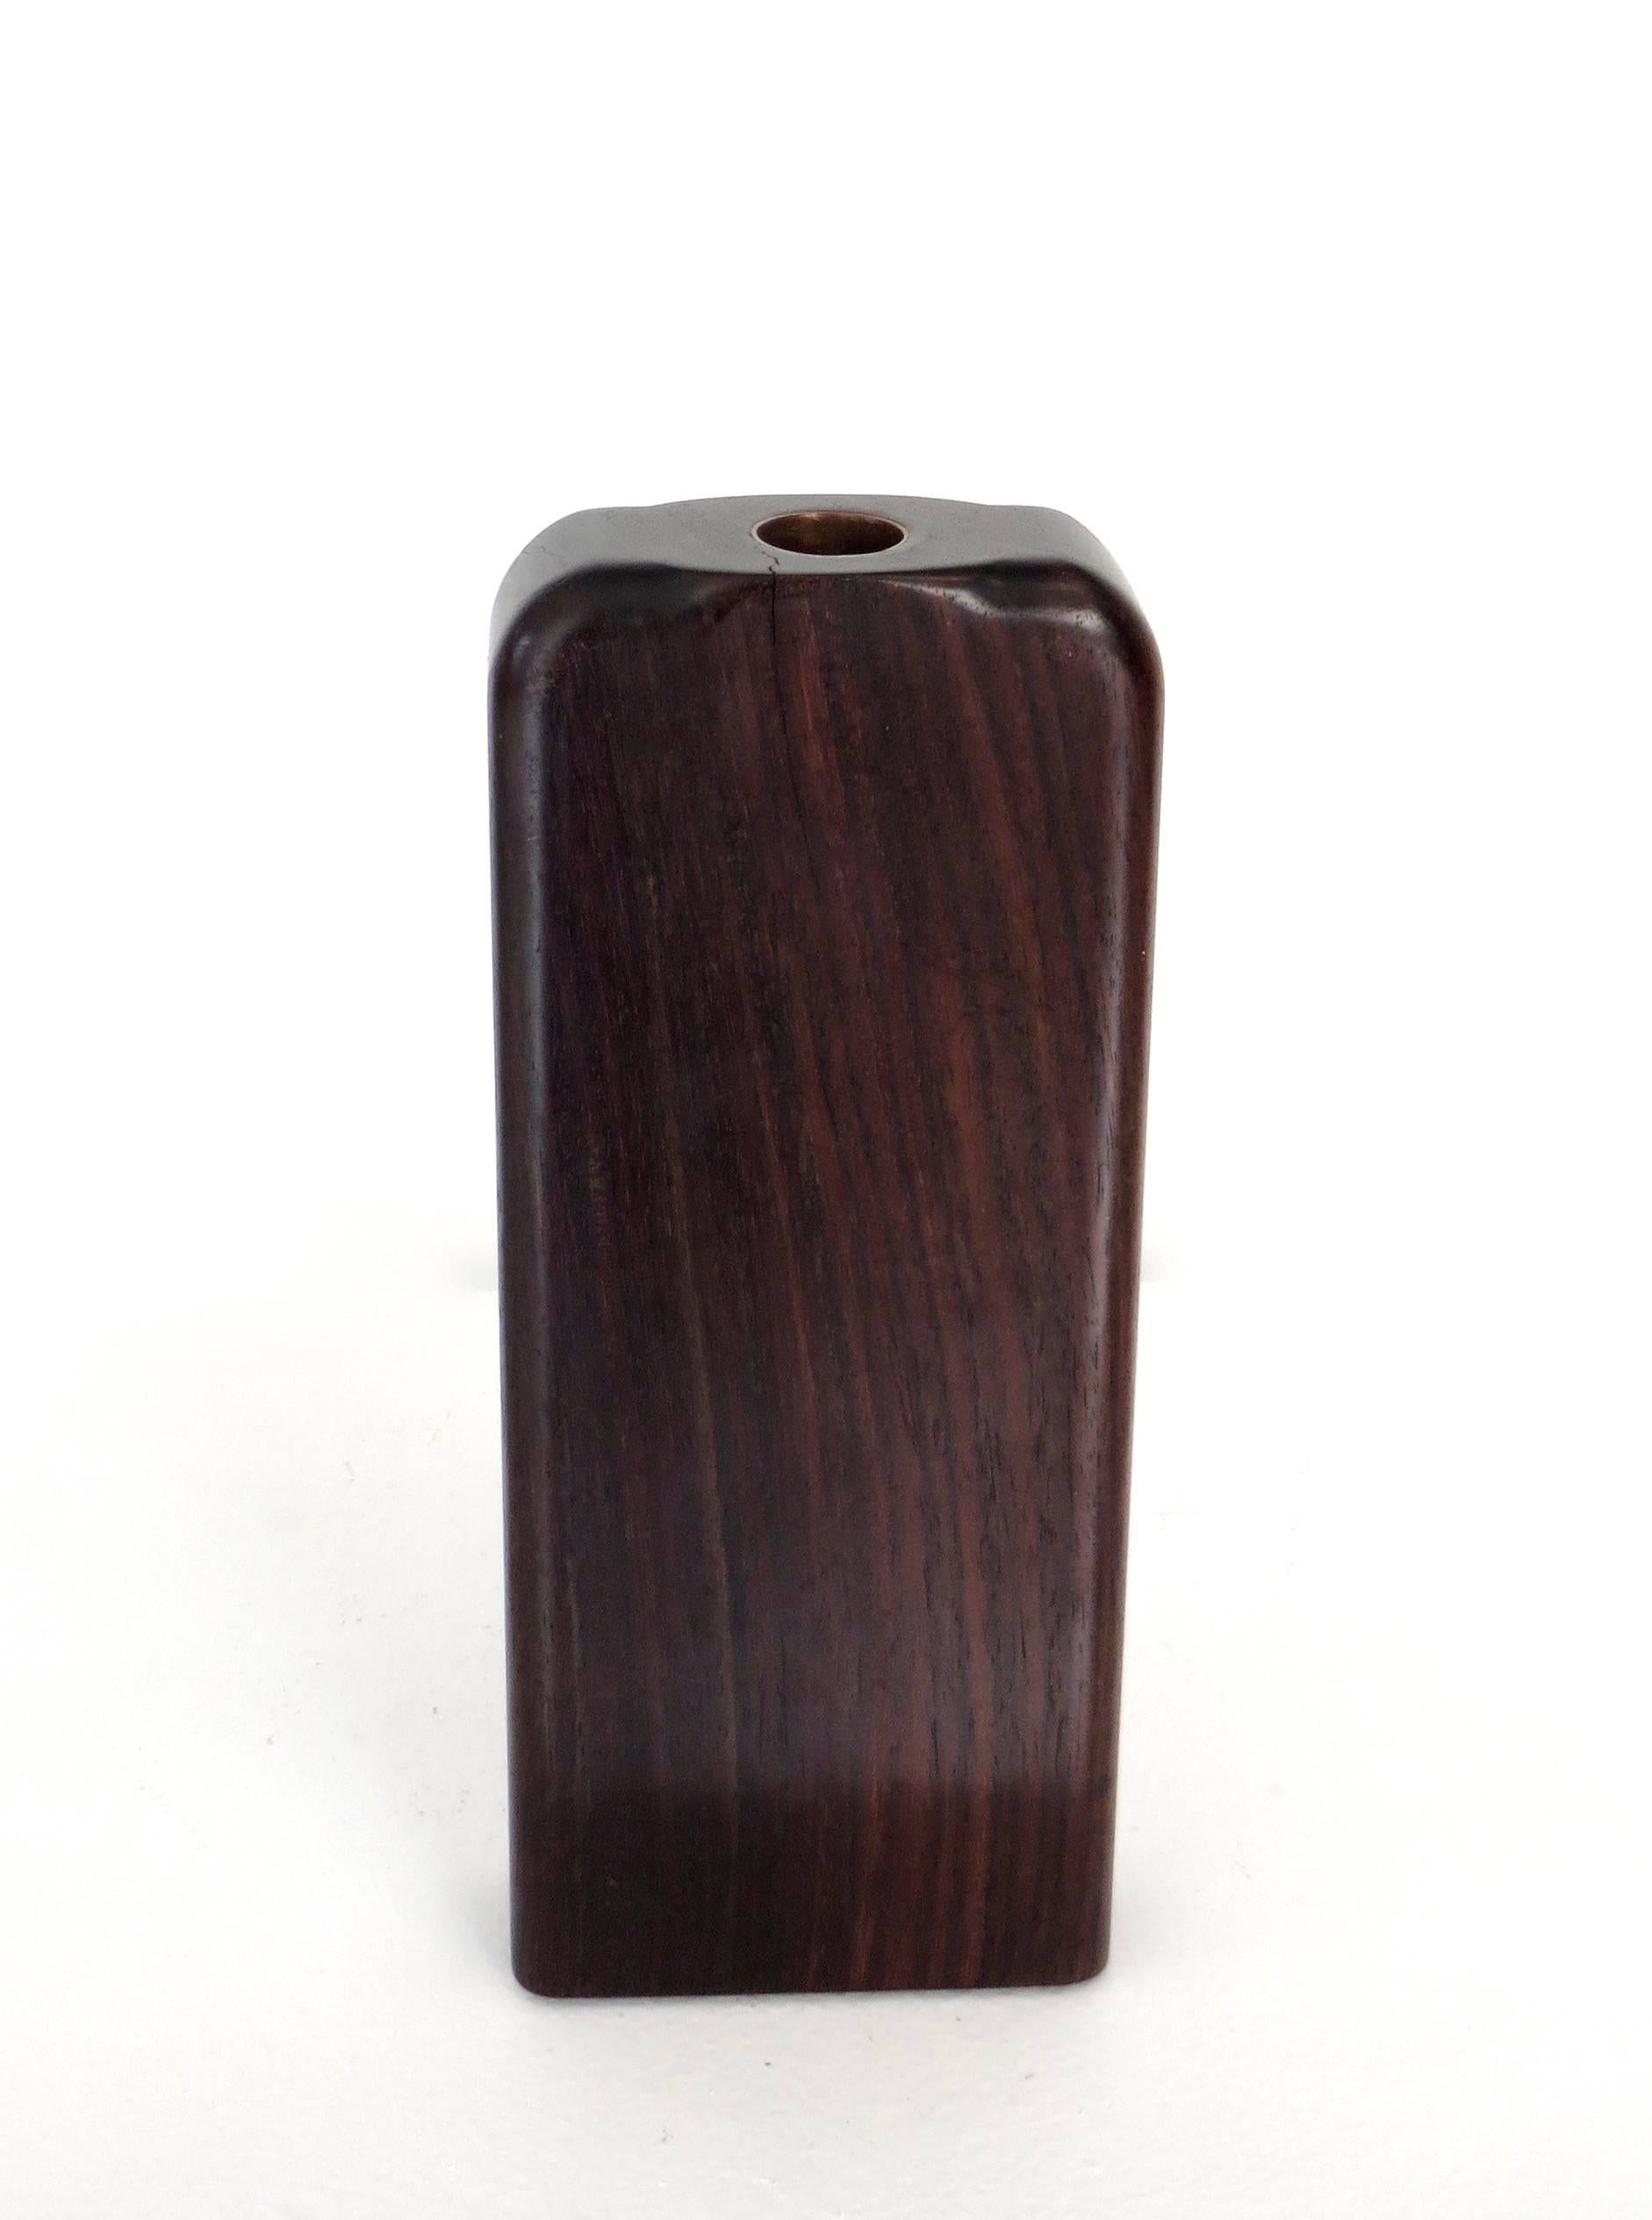 Solid Rosewood Minimalist Artisanal Flower Vase with Copper Liner 5